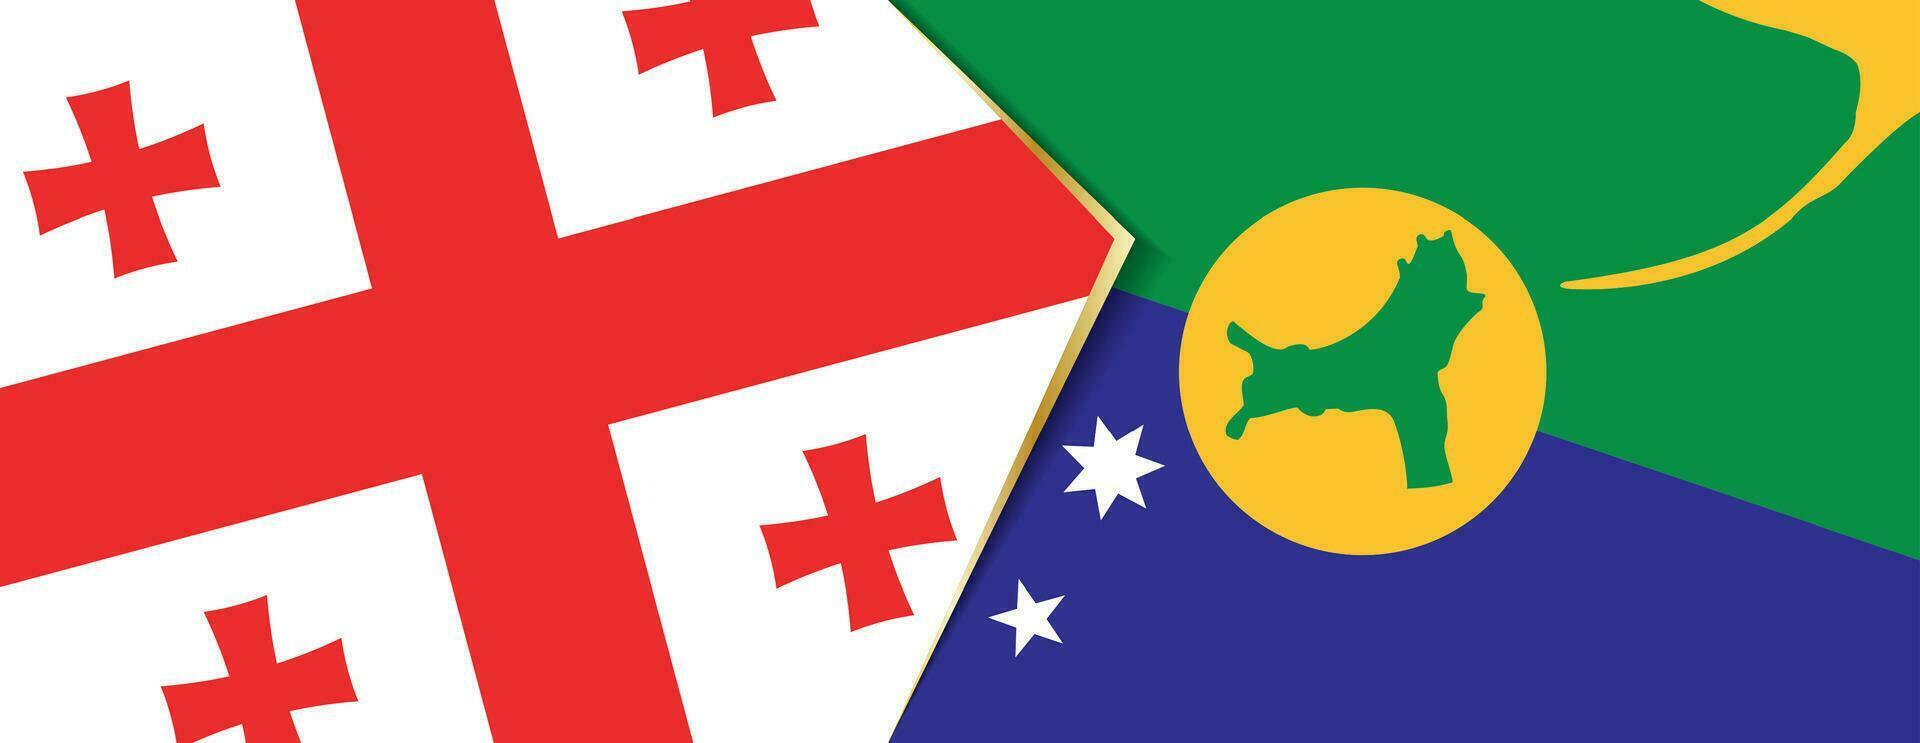 Georgia and Christmas Island flags, two vector flags.